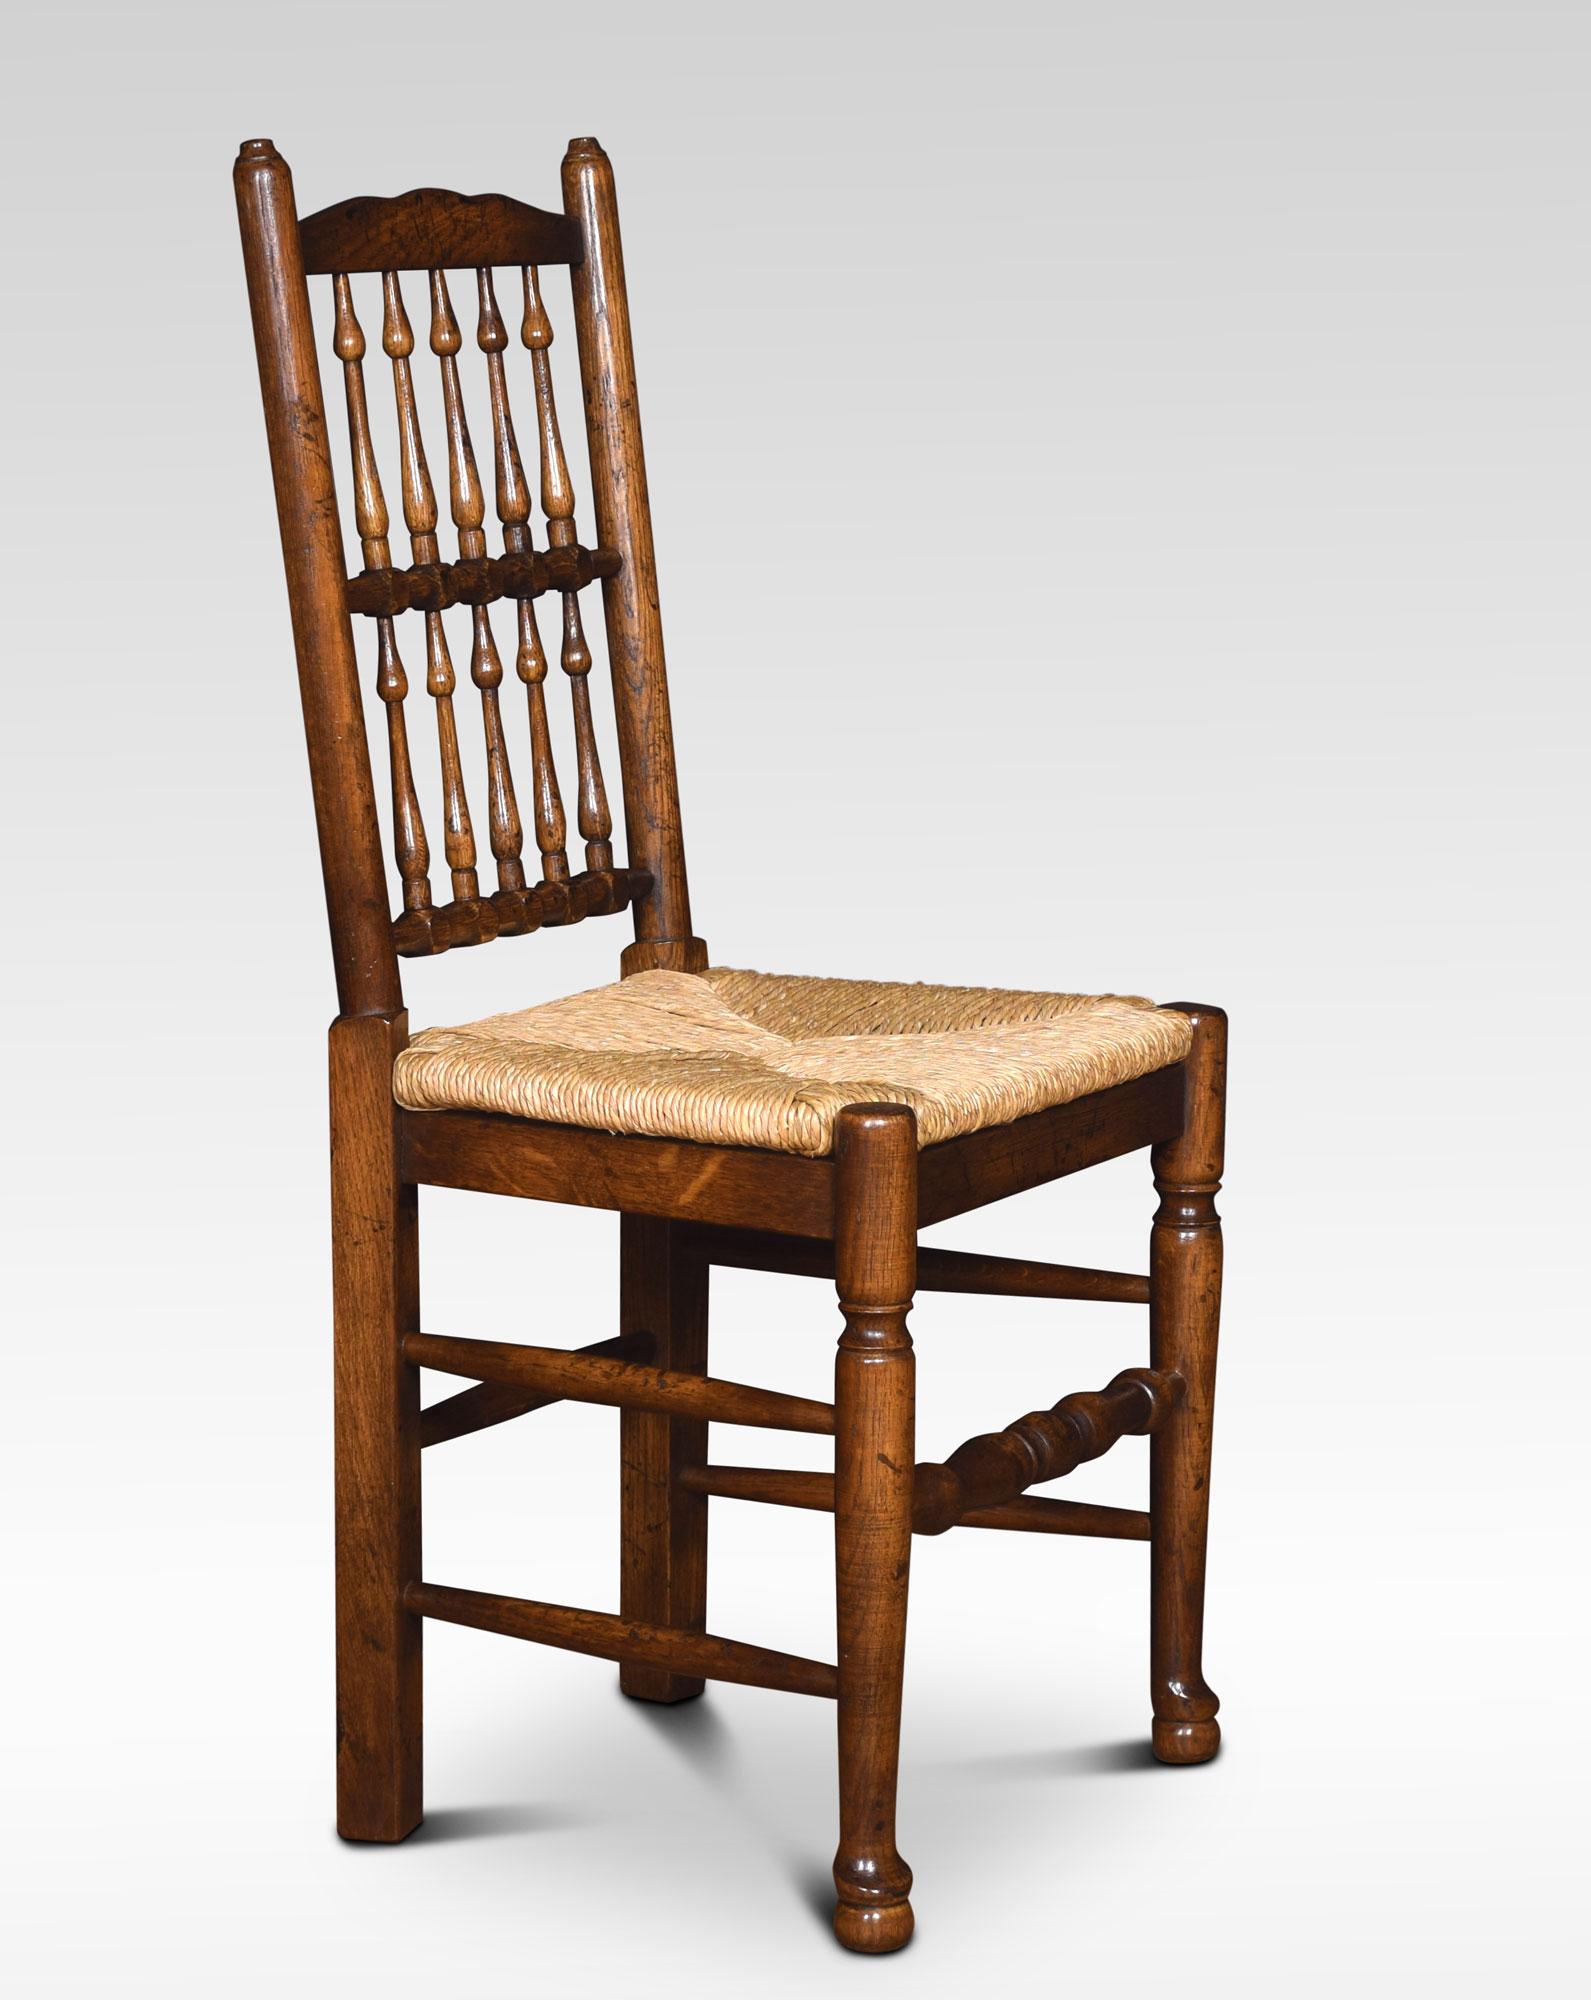 Set of ten high back dining chairs. The spindle backs above the rush seats, all raised up on turned tapering front supports united by stretchers.
Dimensions:
Height 40 inches height to seat 19 inches
Width 19 inches
Depth 15.5 inches.